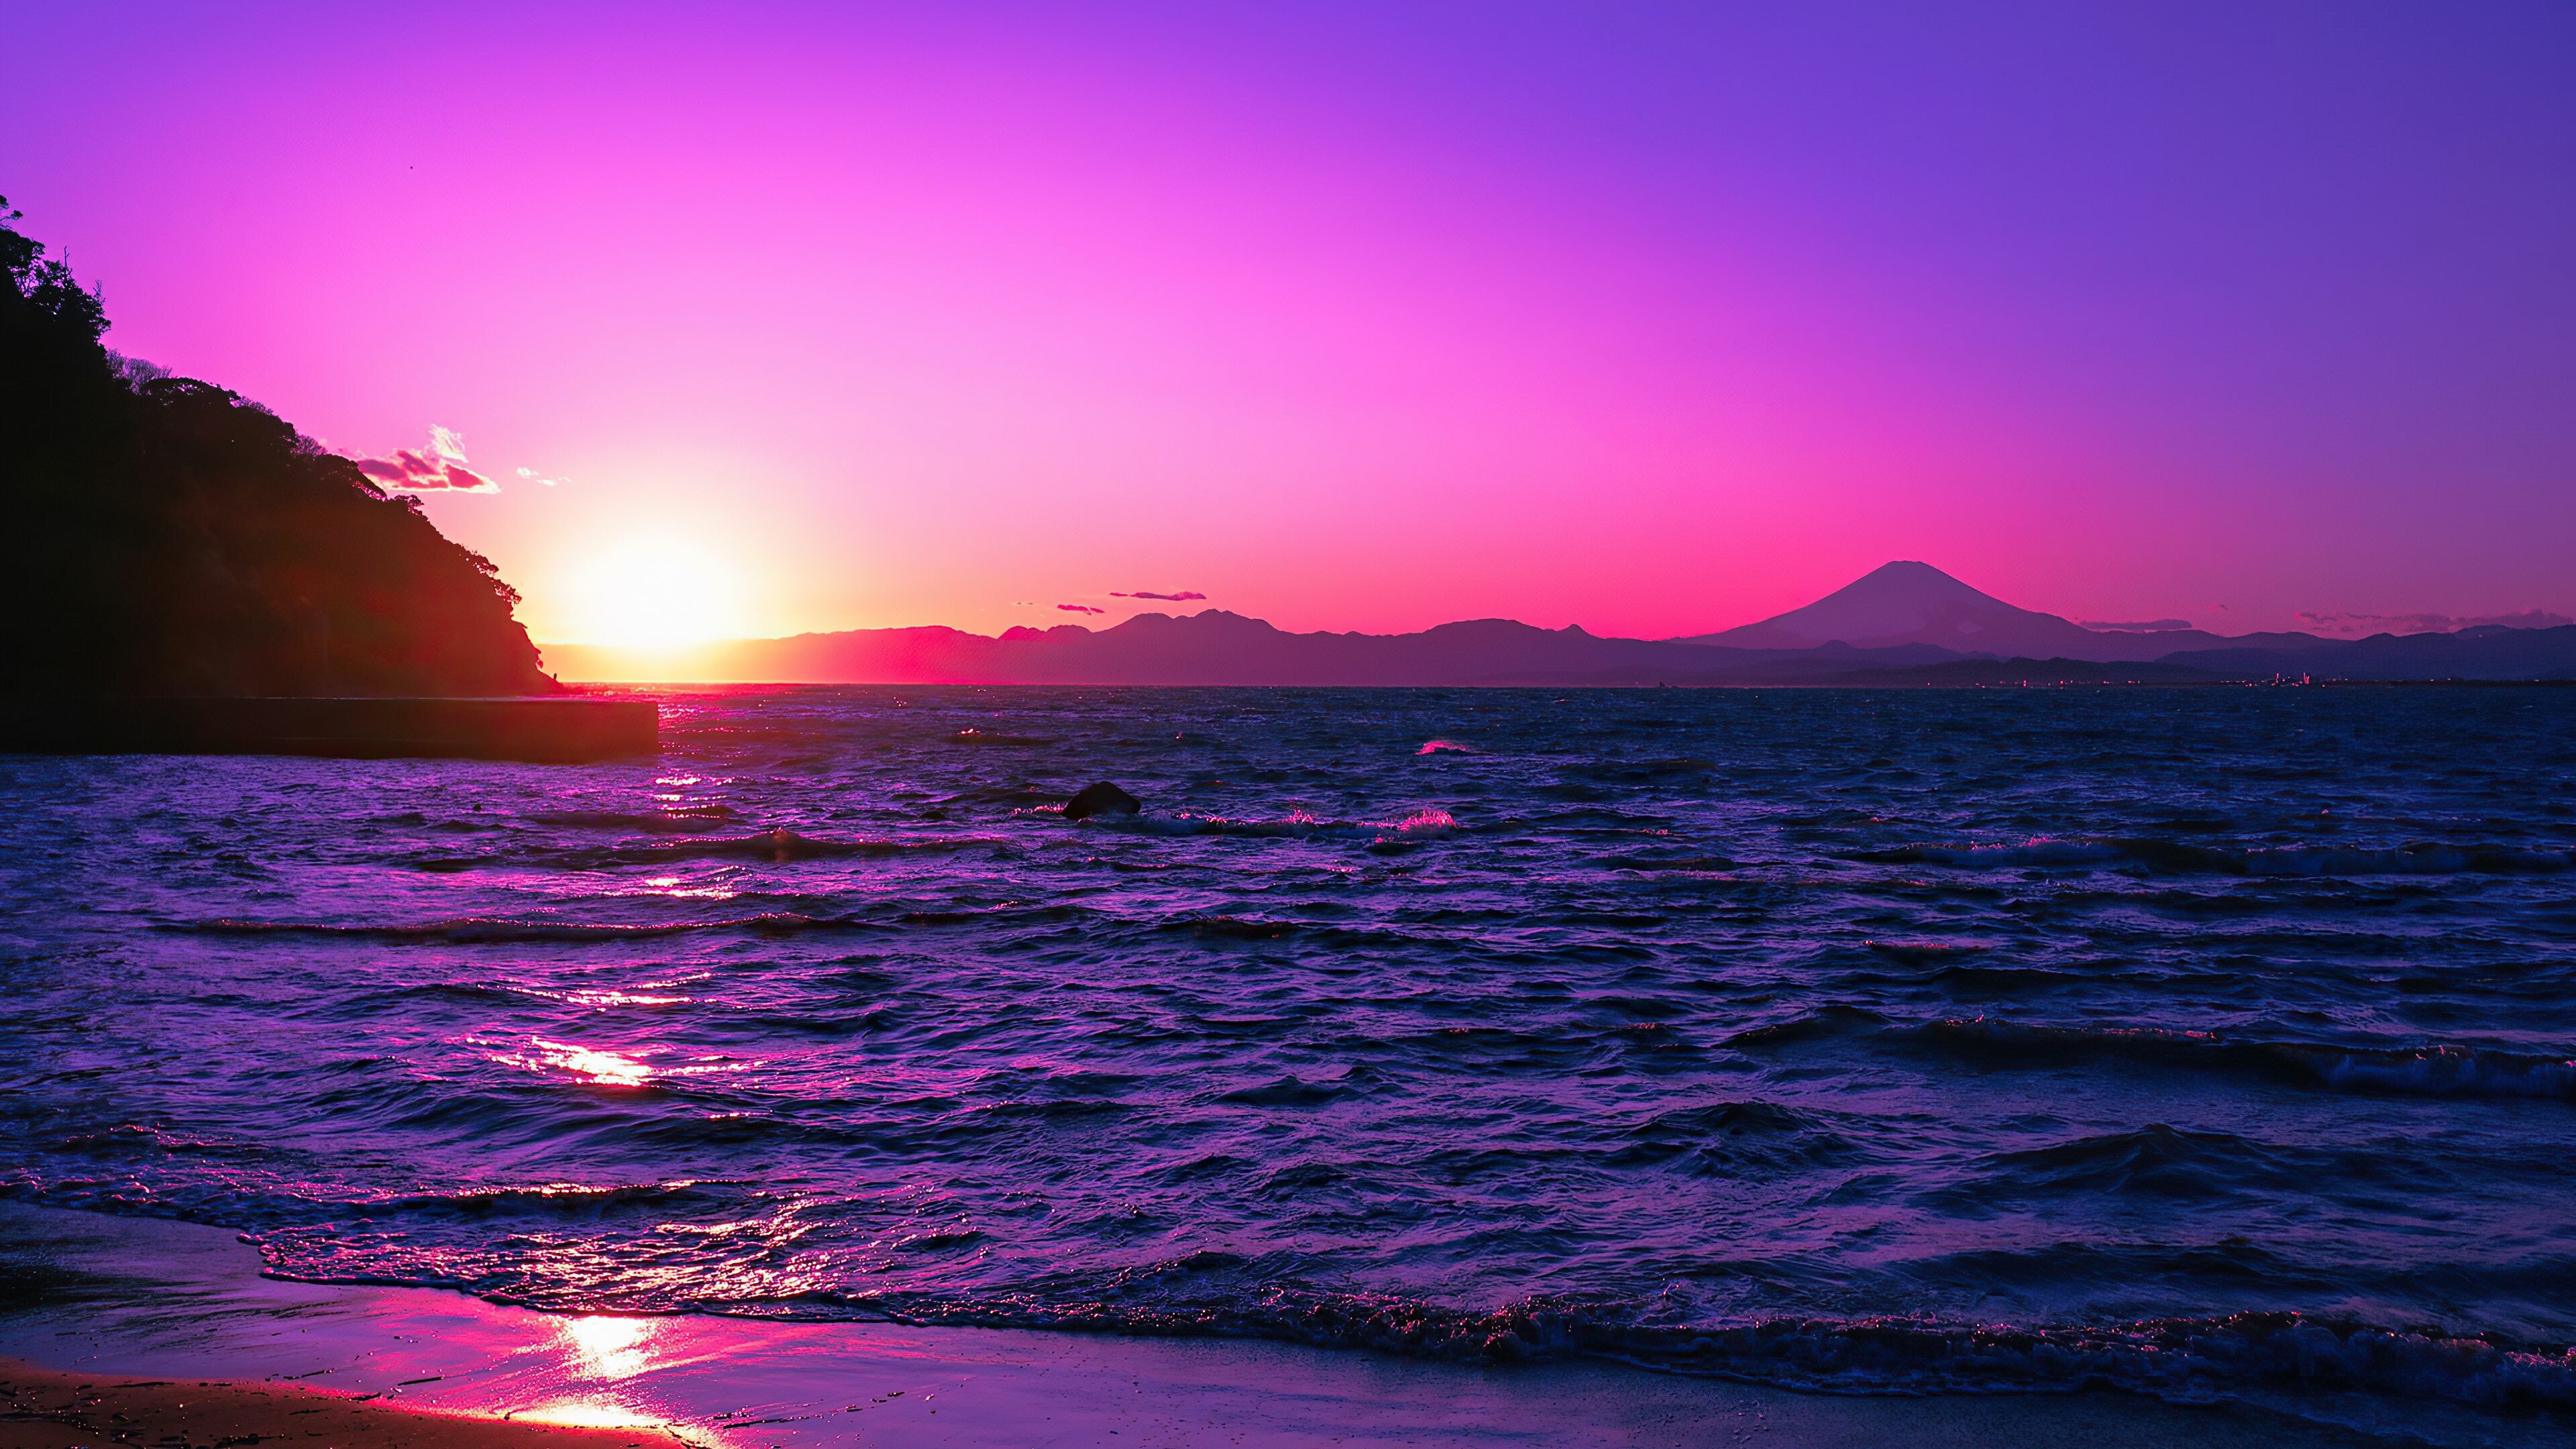 Sunset: The daily disappearance of the sun below the western horizon, Seascape. 3840x2160 4K Wallpaper.